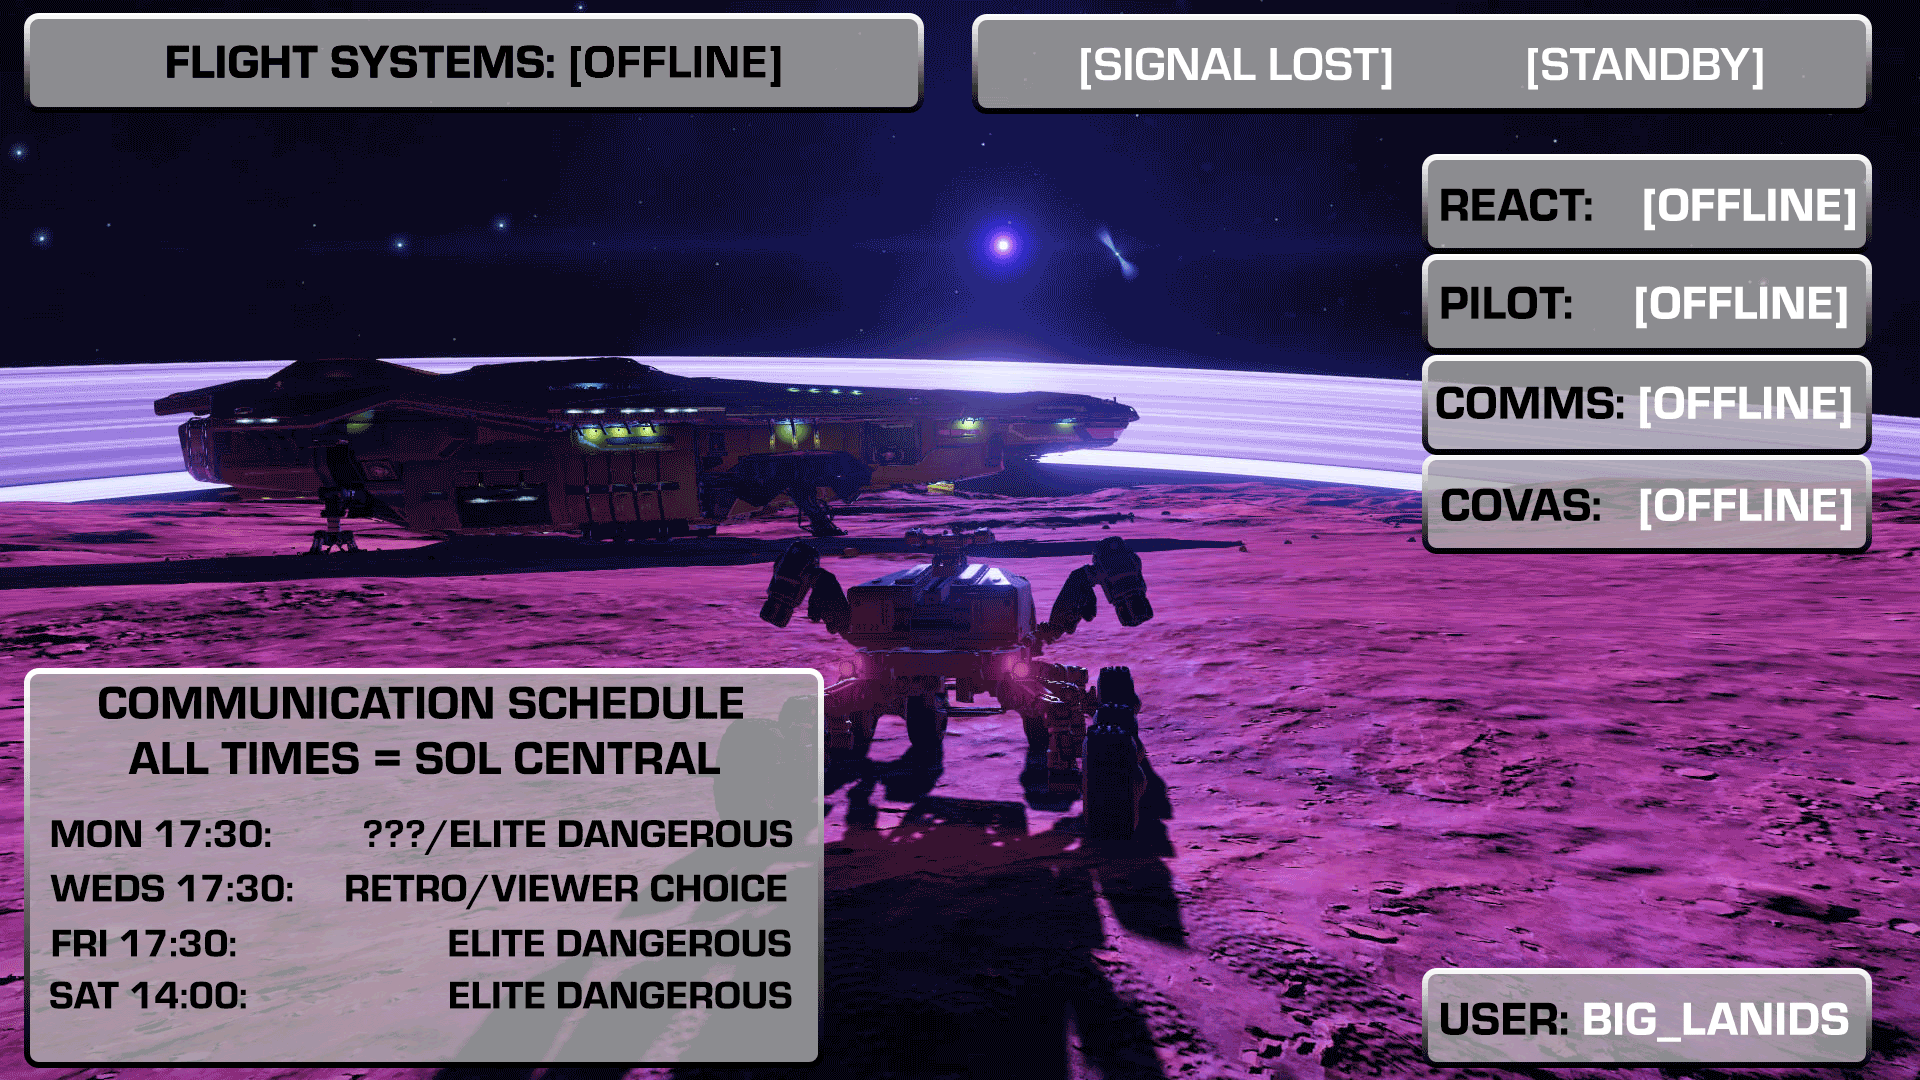 Revised copy of the stream offline graphic with animated console effects and much more elaborate text. Background shows ship and wheeled vehicle on alien world.